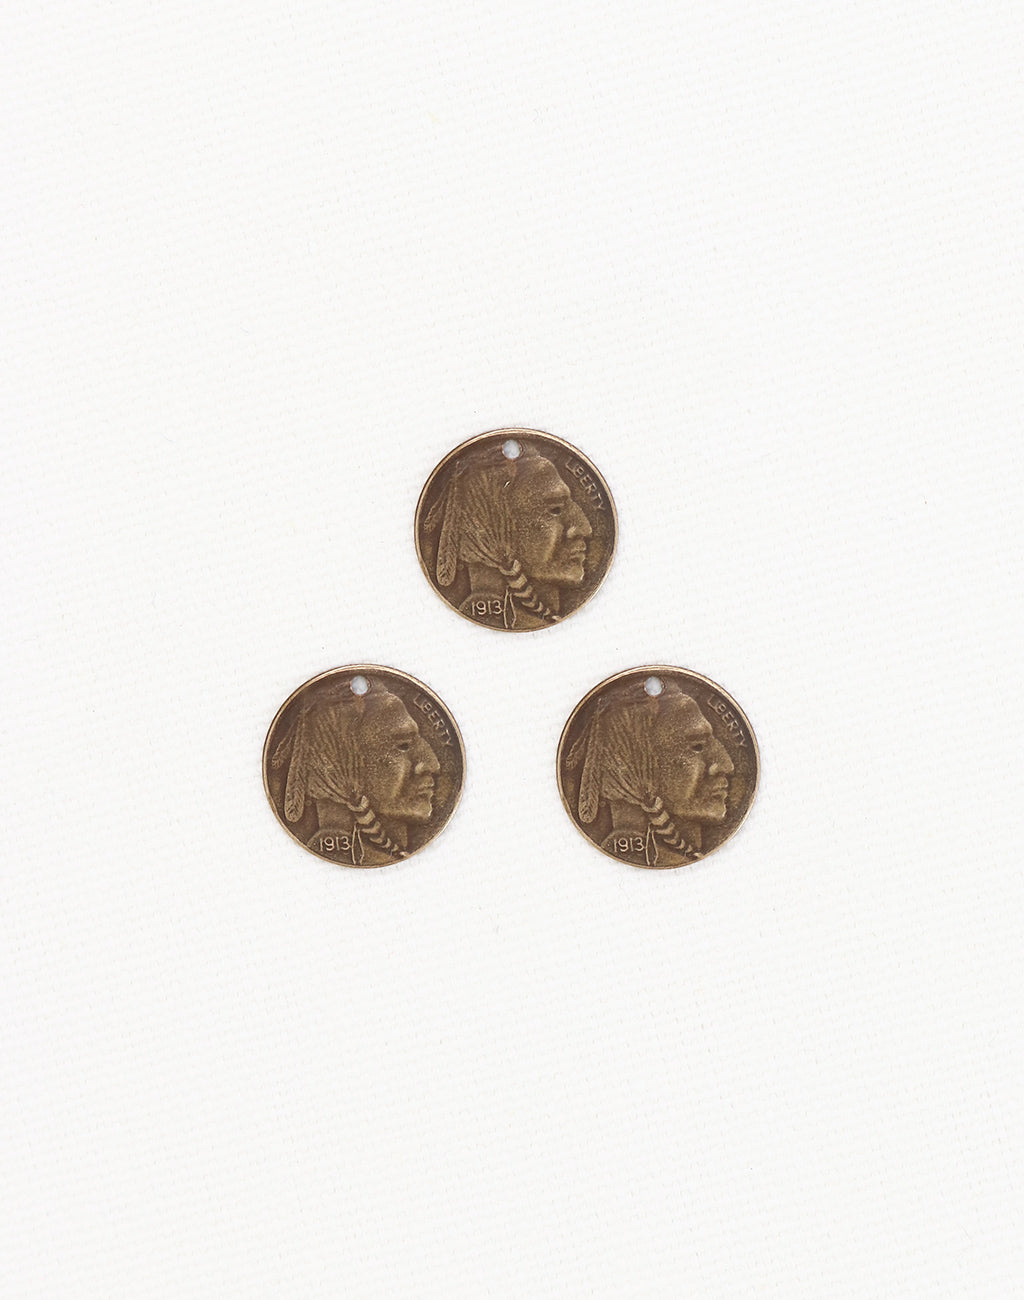 Brave Indian Coin, 13mm, (3pcs)